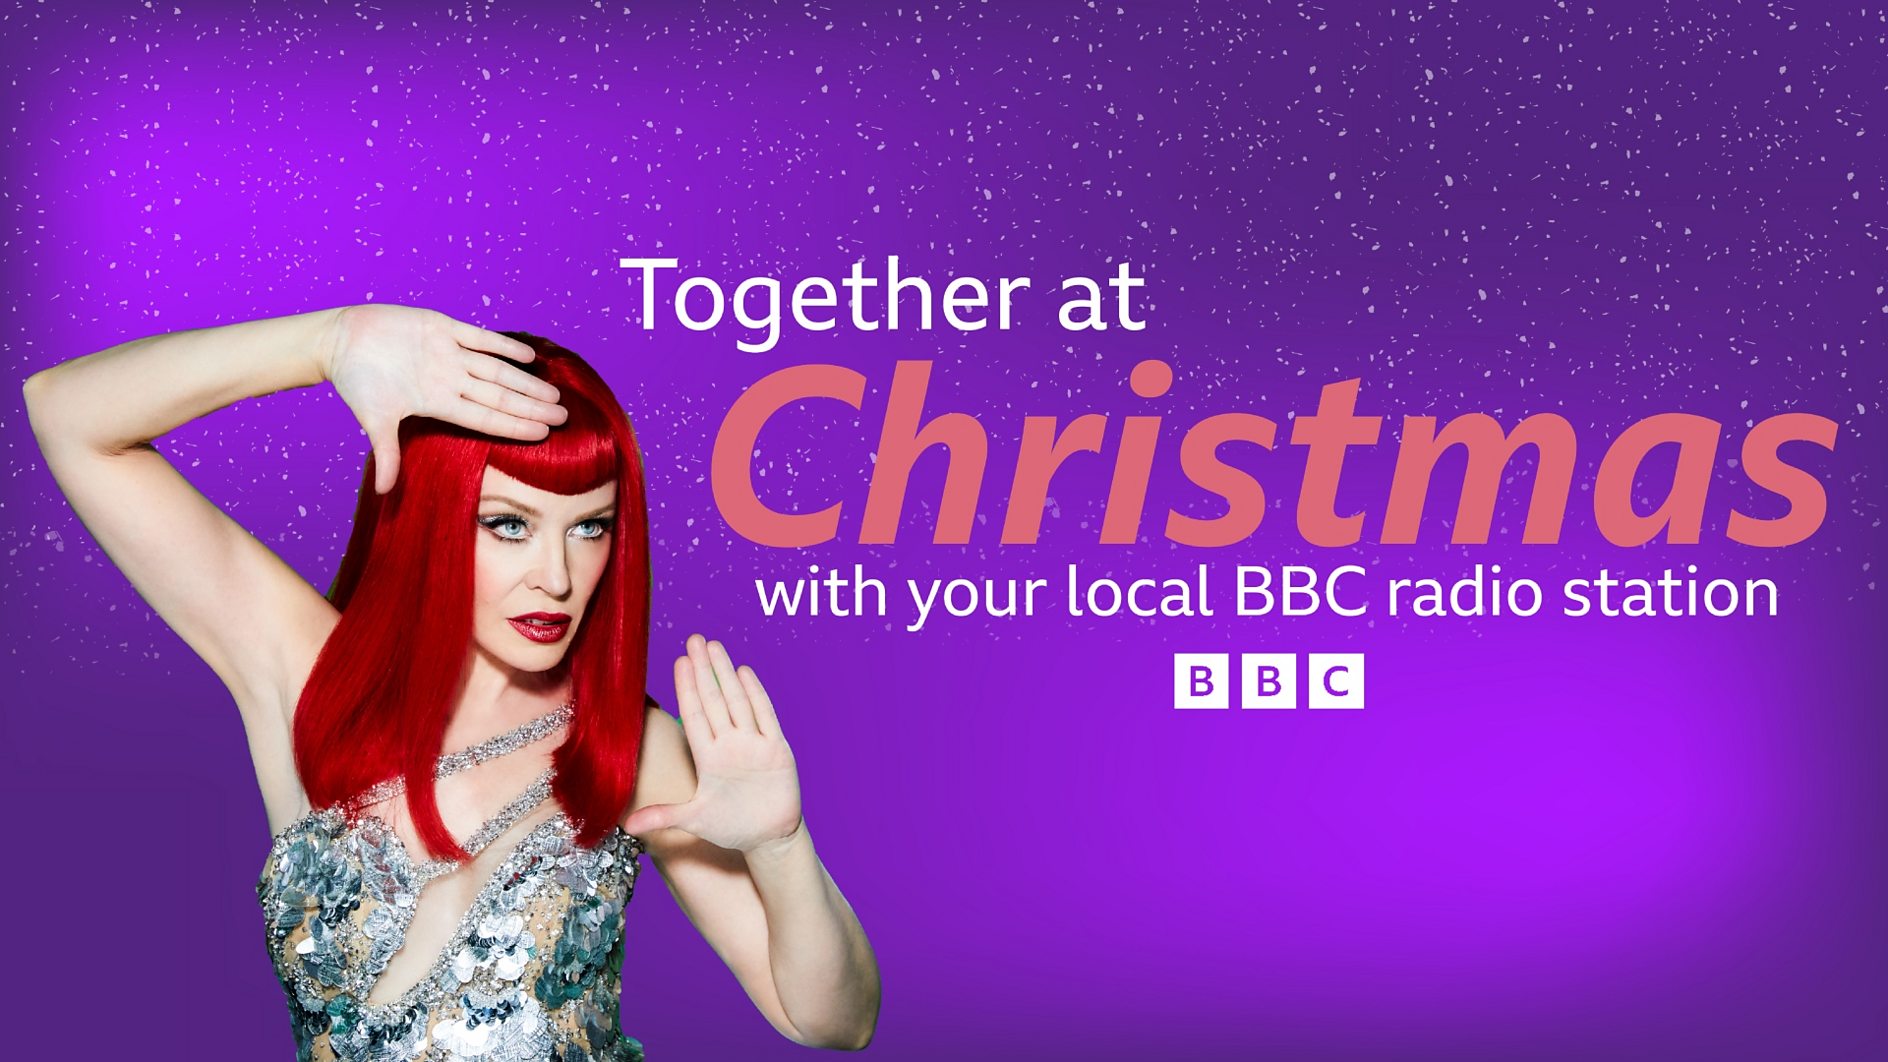 This Christmas, pop sensation Kylie Minogue thanks BBC Make a Difference Award winners